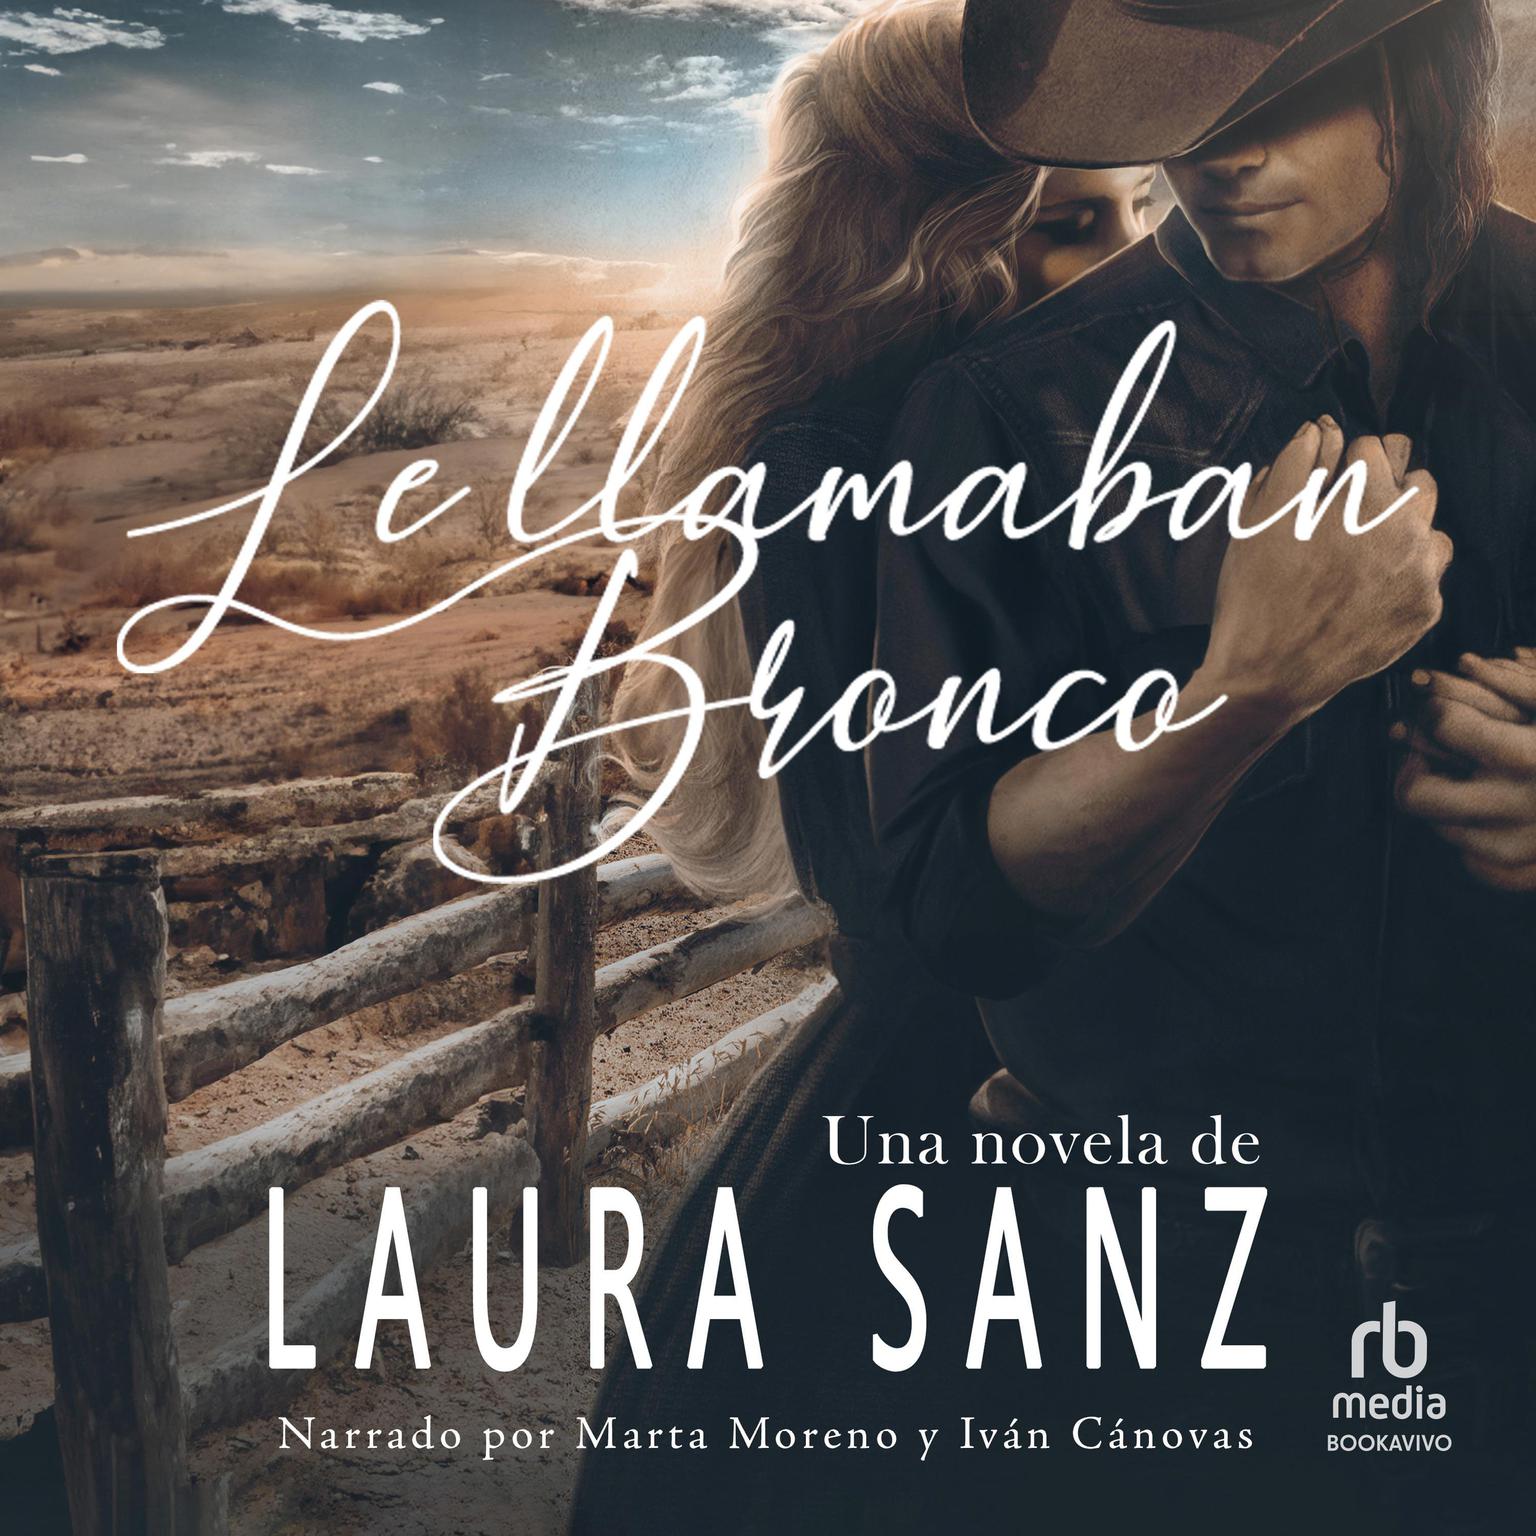 Le llamaban Bronco (They Called him Bronco) Audiobook, by Laura Sanz